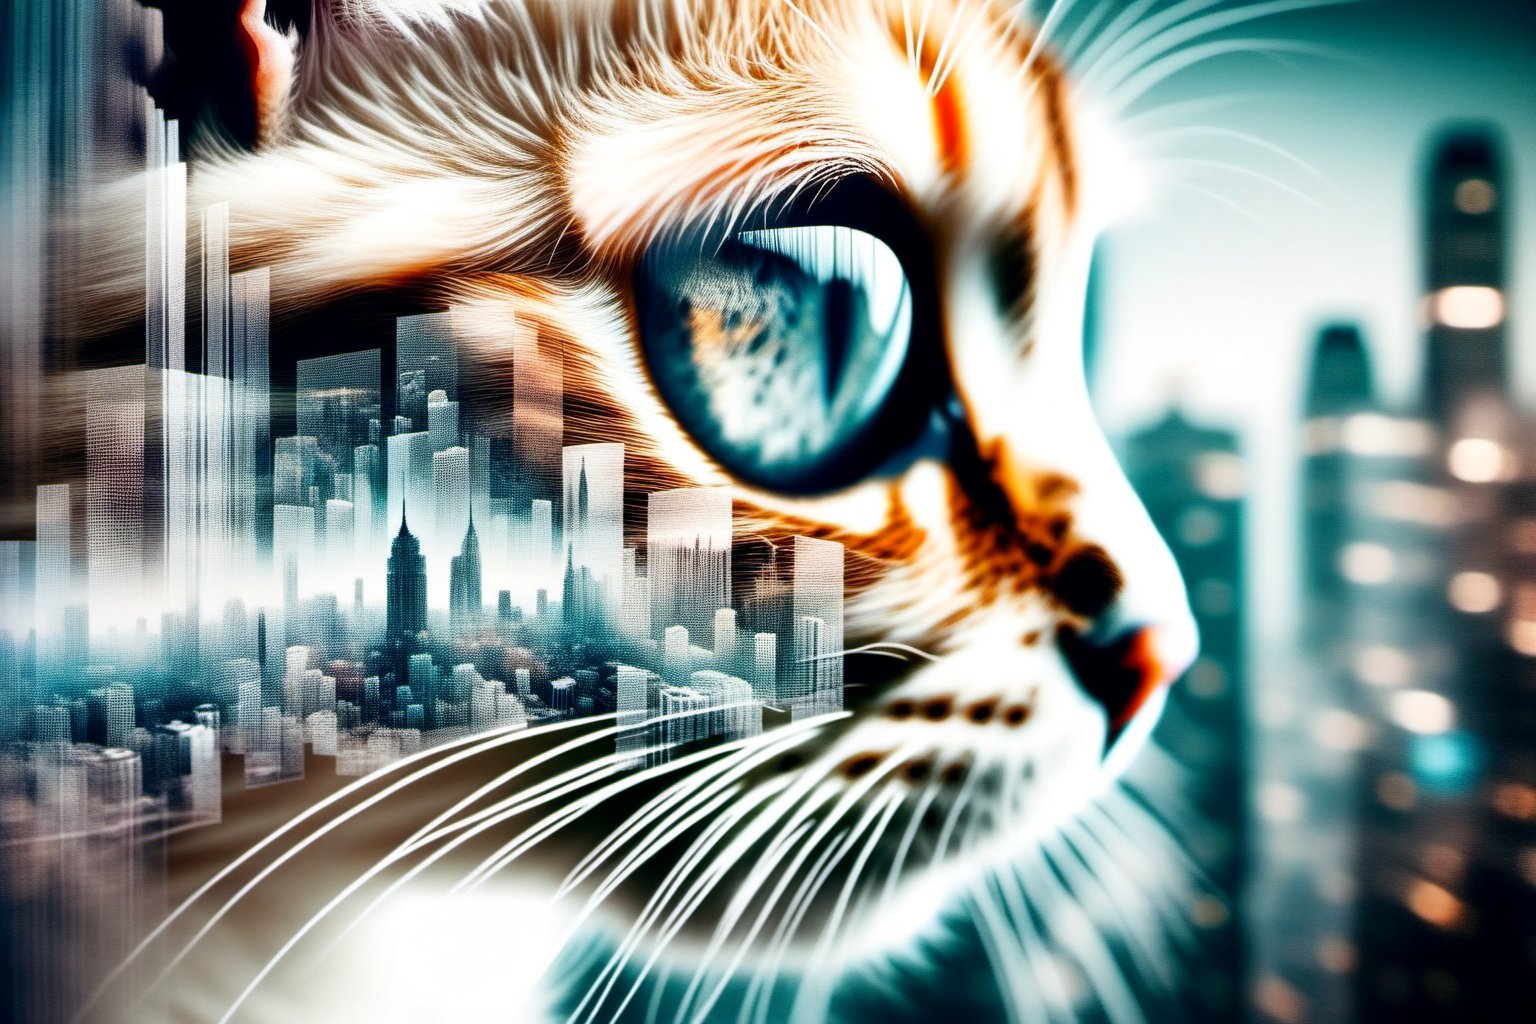 A macro close up Double Exposure: A cat reflecting an intricate cityscape within, evoking Curiosity, Mystery, Introspection, Whimsical Surreality - featuring Fine Detail, High Contrast, Layered Imagery, Double Exposure Photography, Soft Lighting.